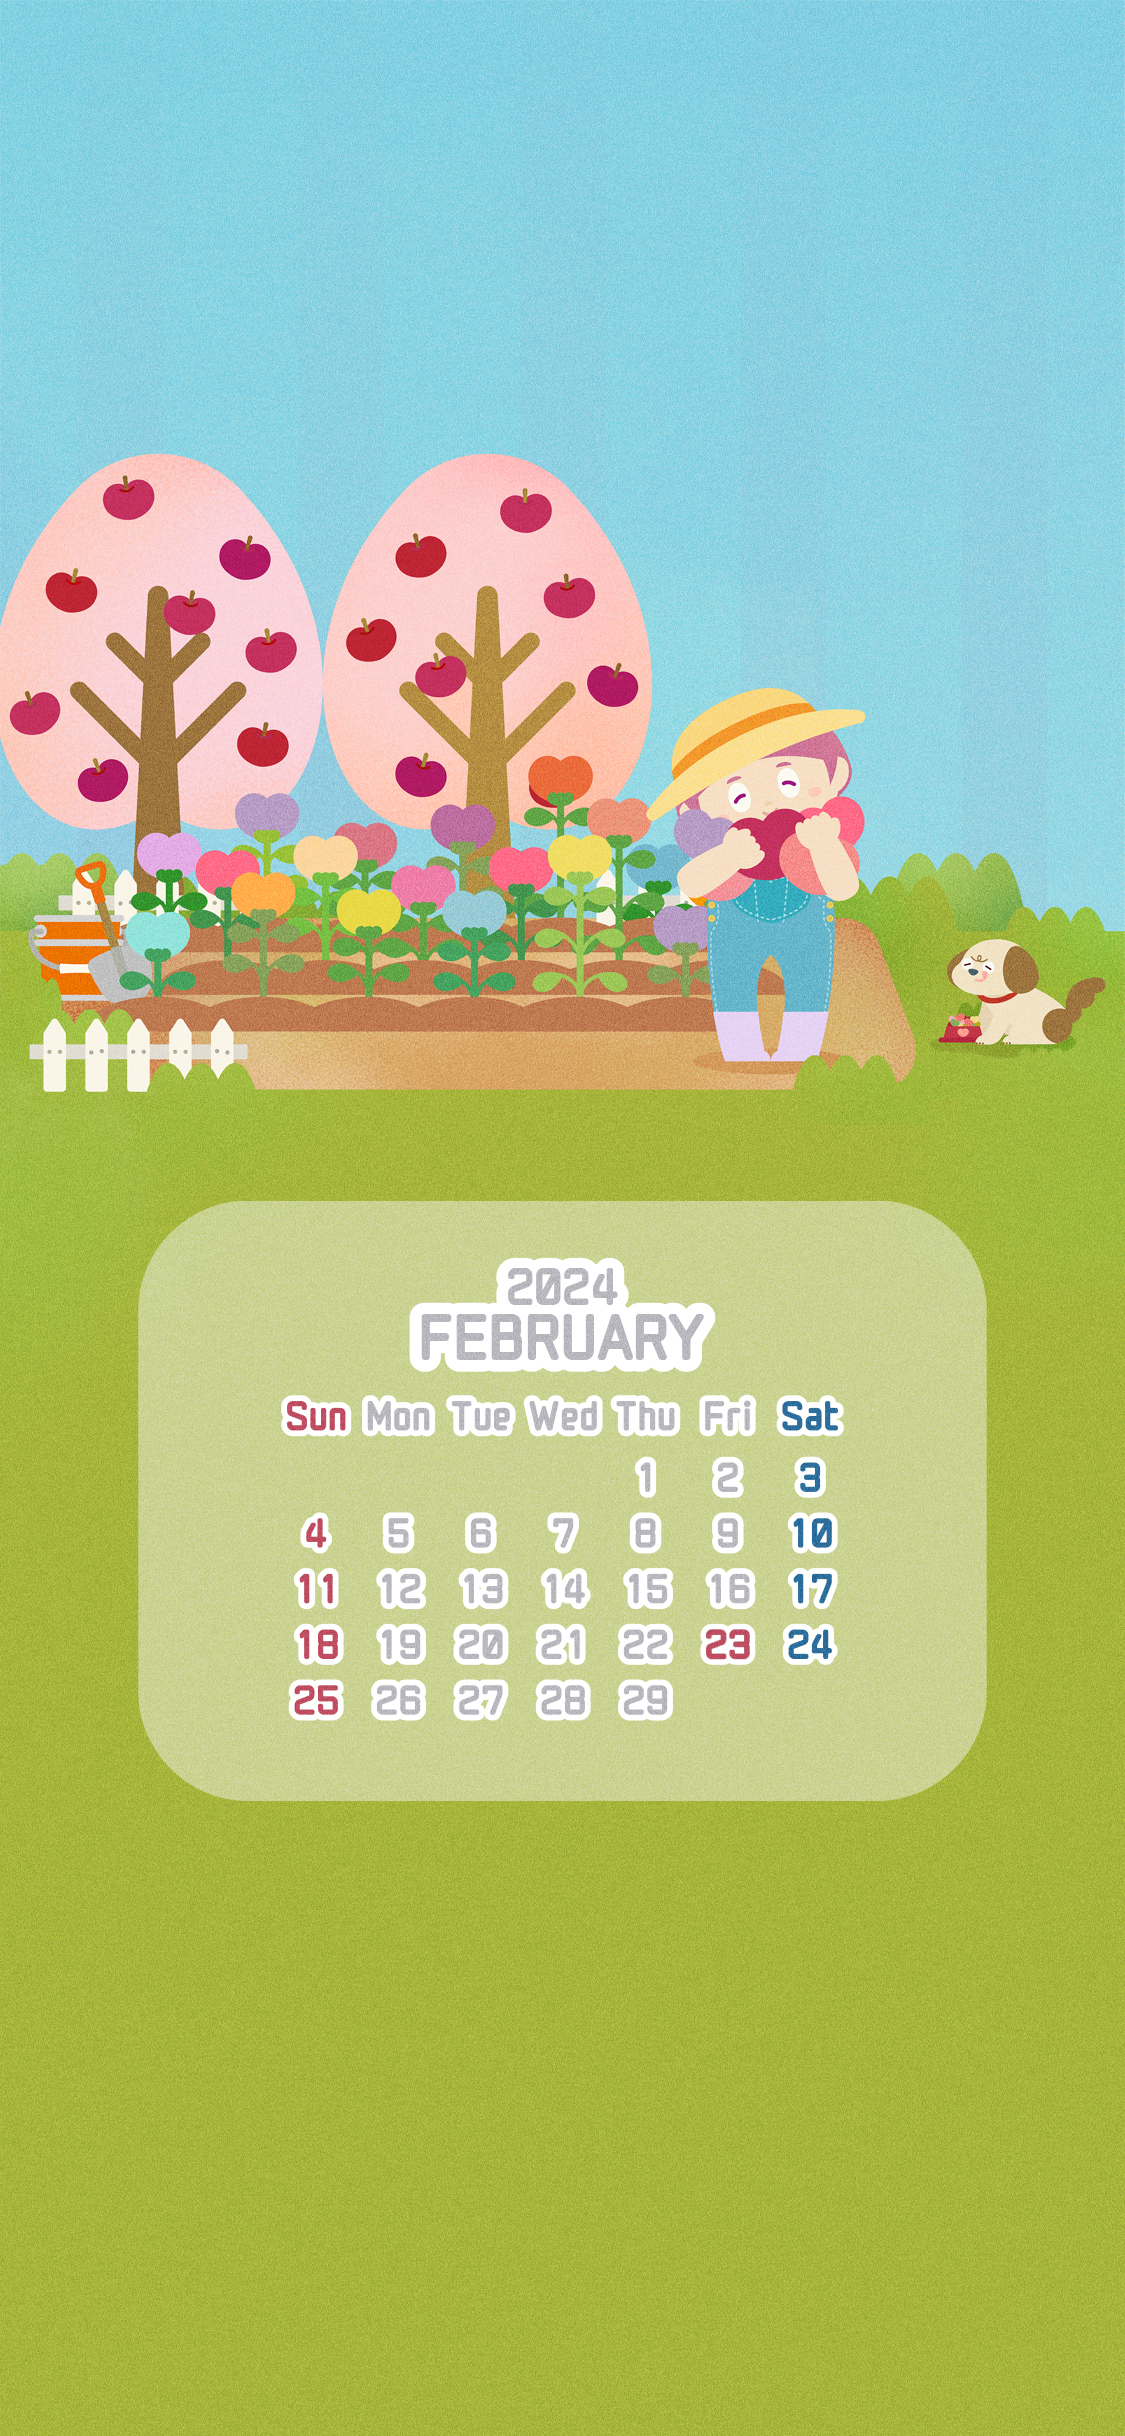 Feruary calendar for mobile Phone wall paper rendition image